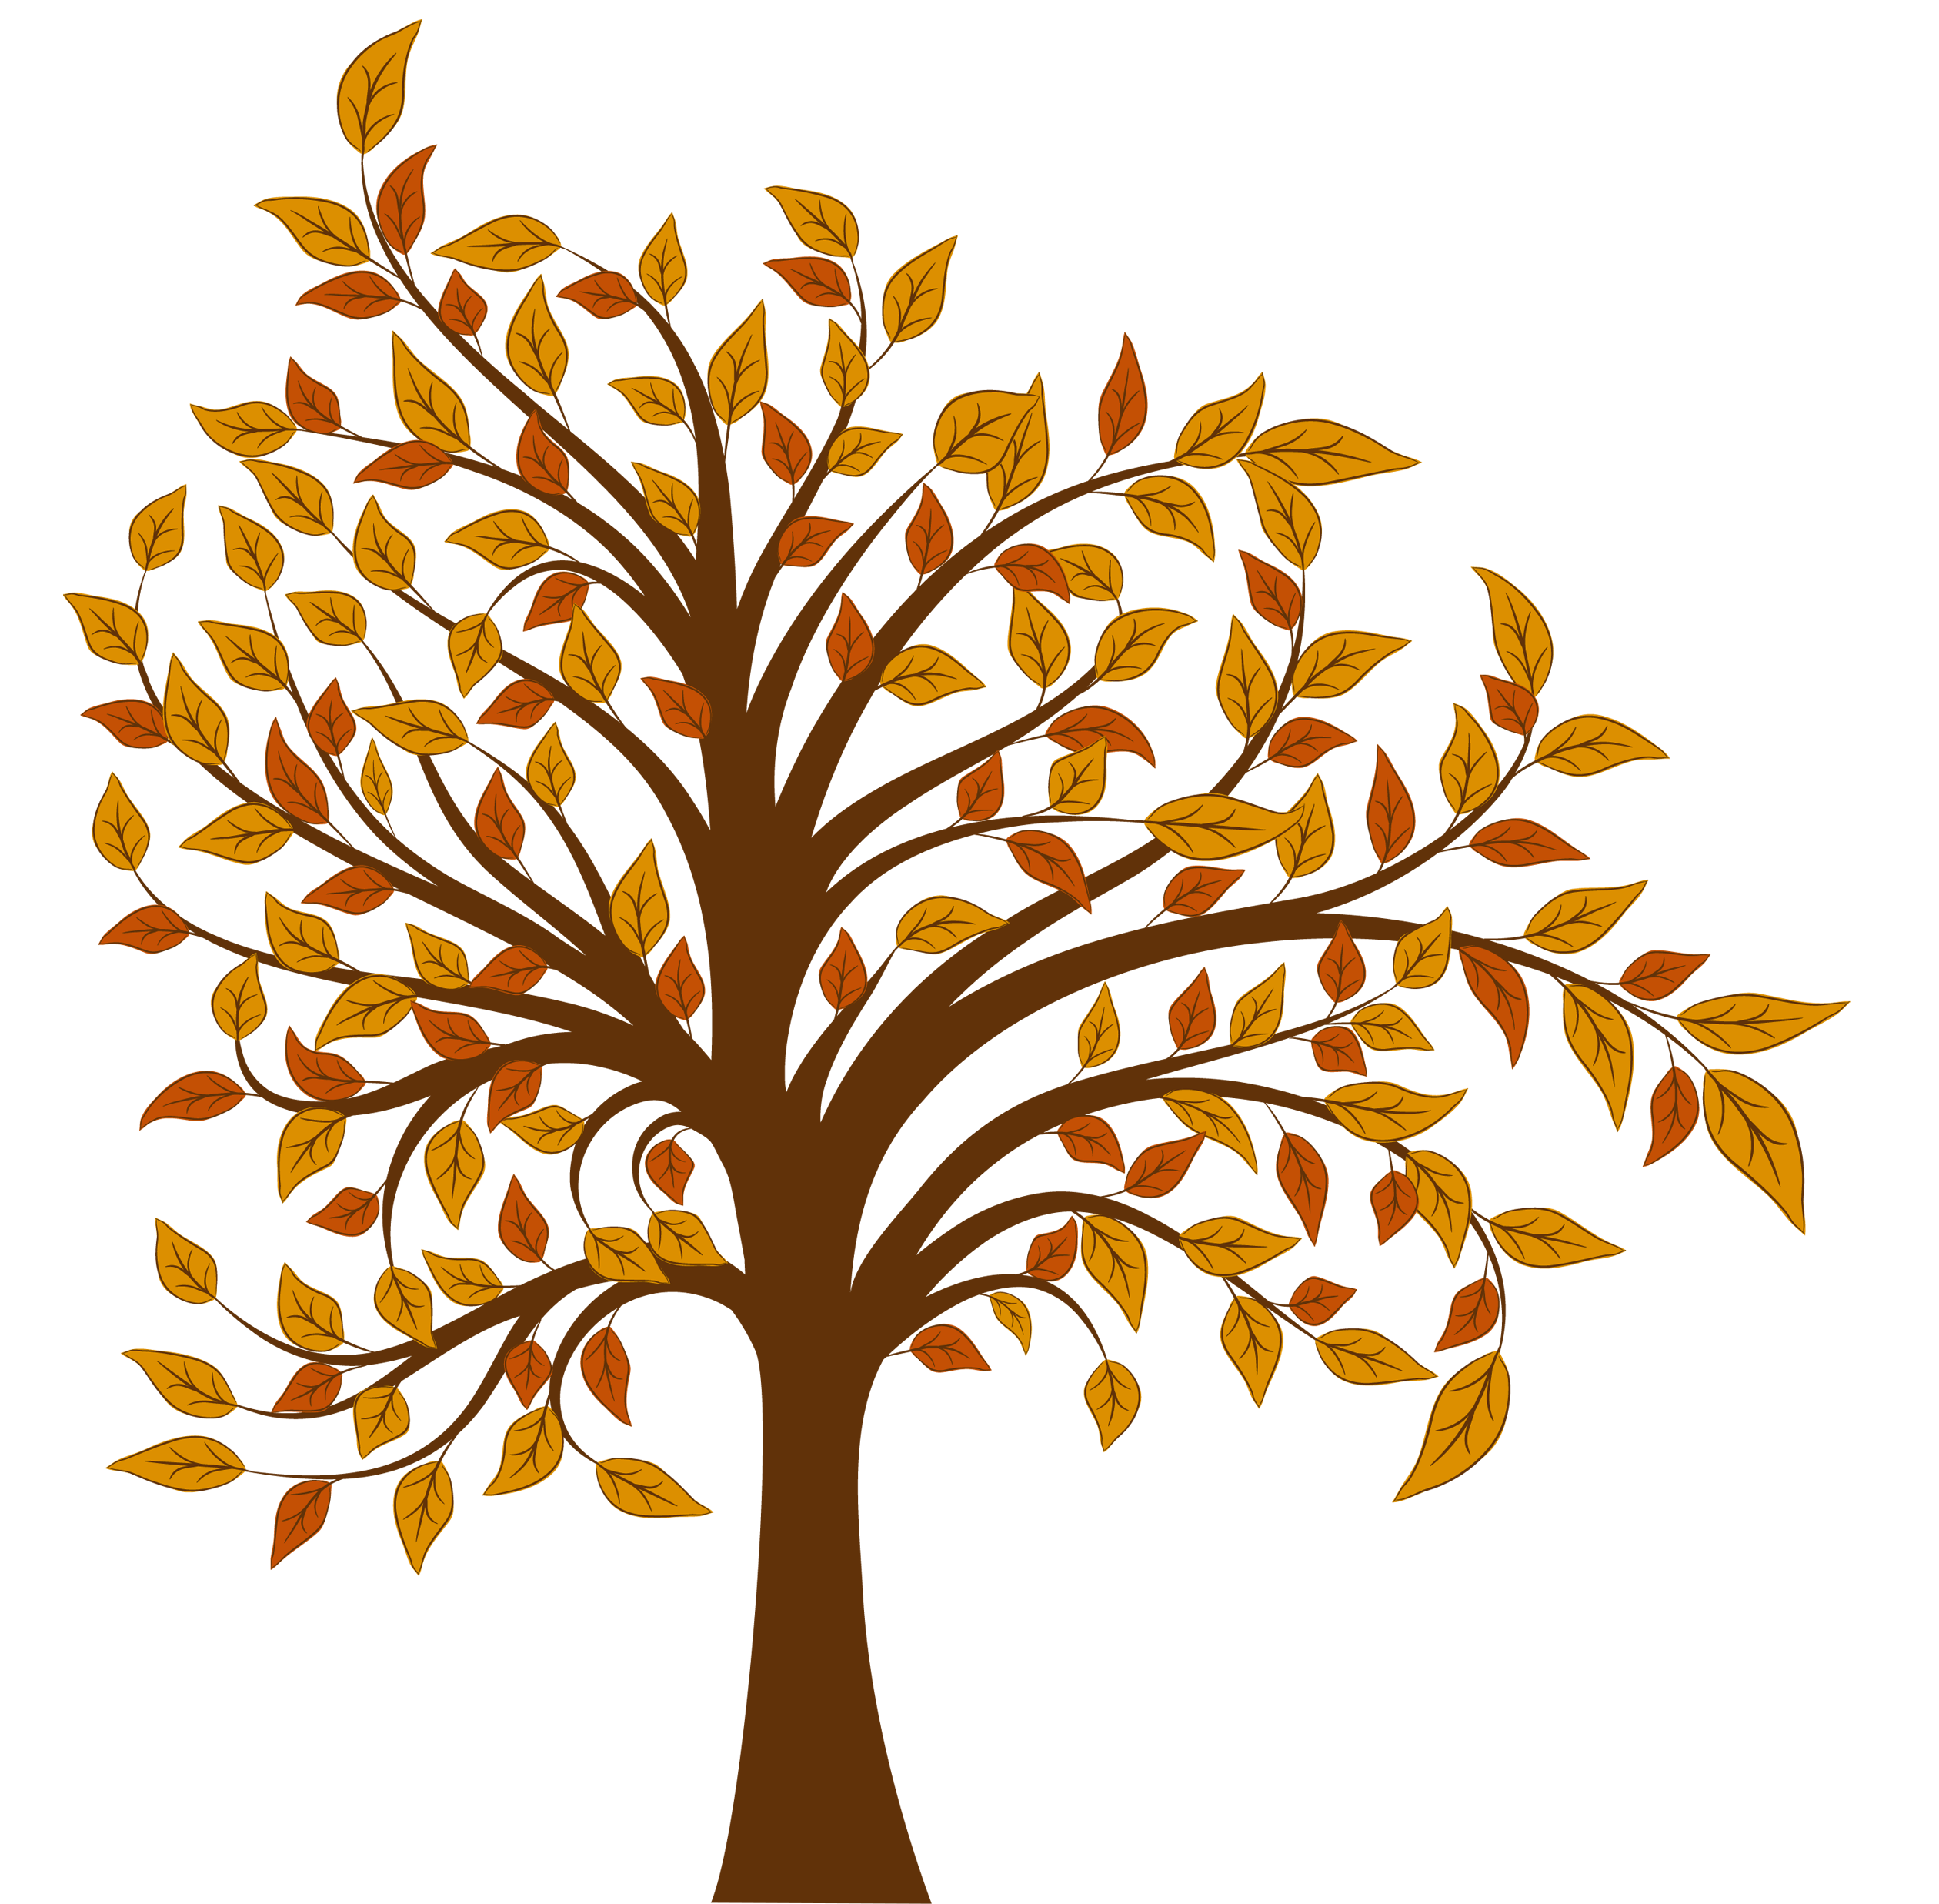 tree clipart png - Clipground